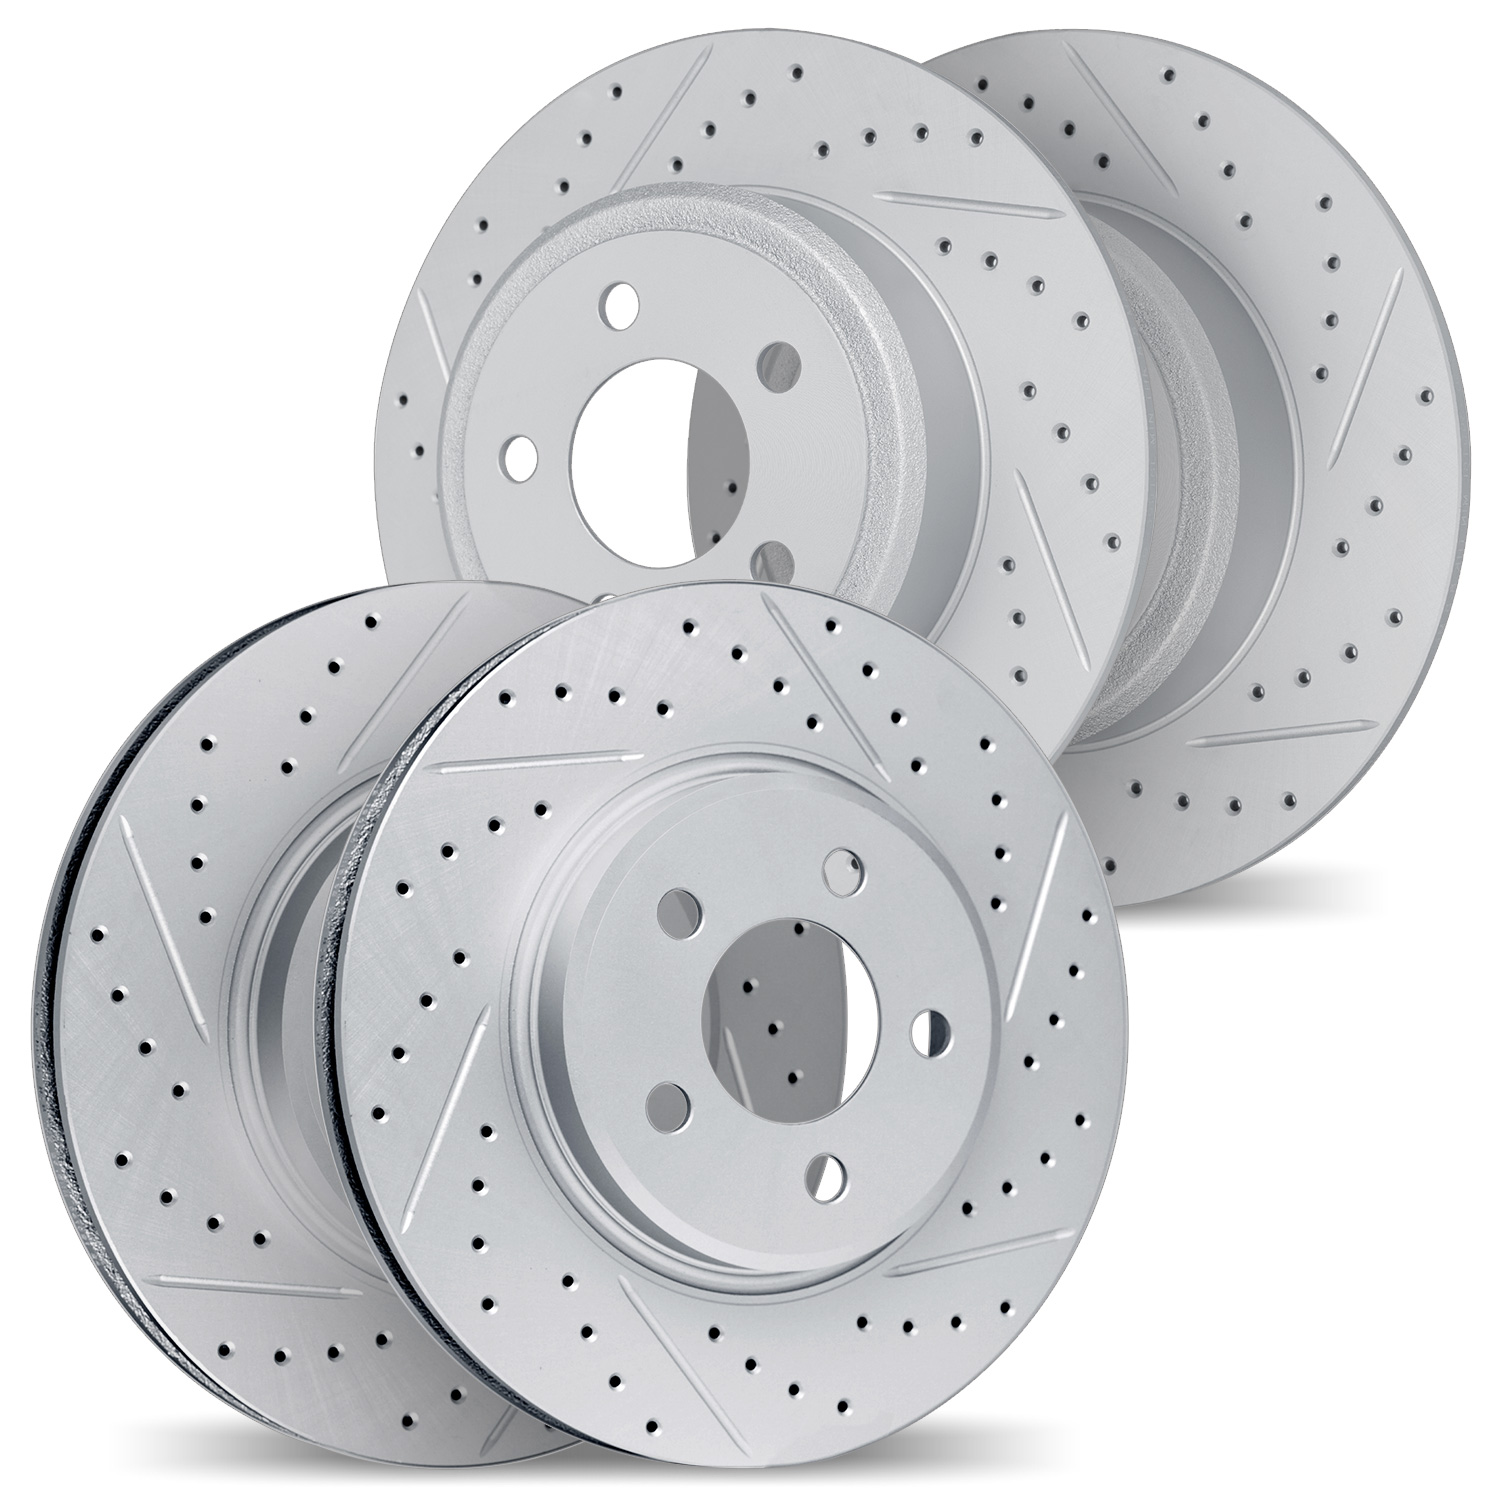 2004-63052 Geoperformance Drilled/Slotted Brake Rotors, 1996-1998 Mercedes-Benz, Position: Front and Rear